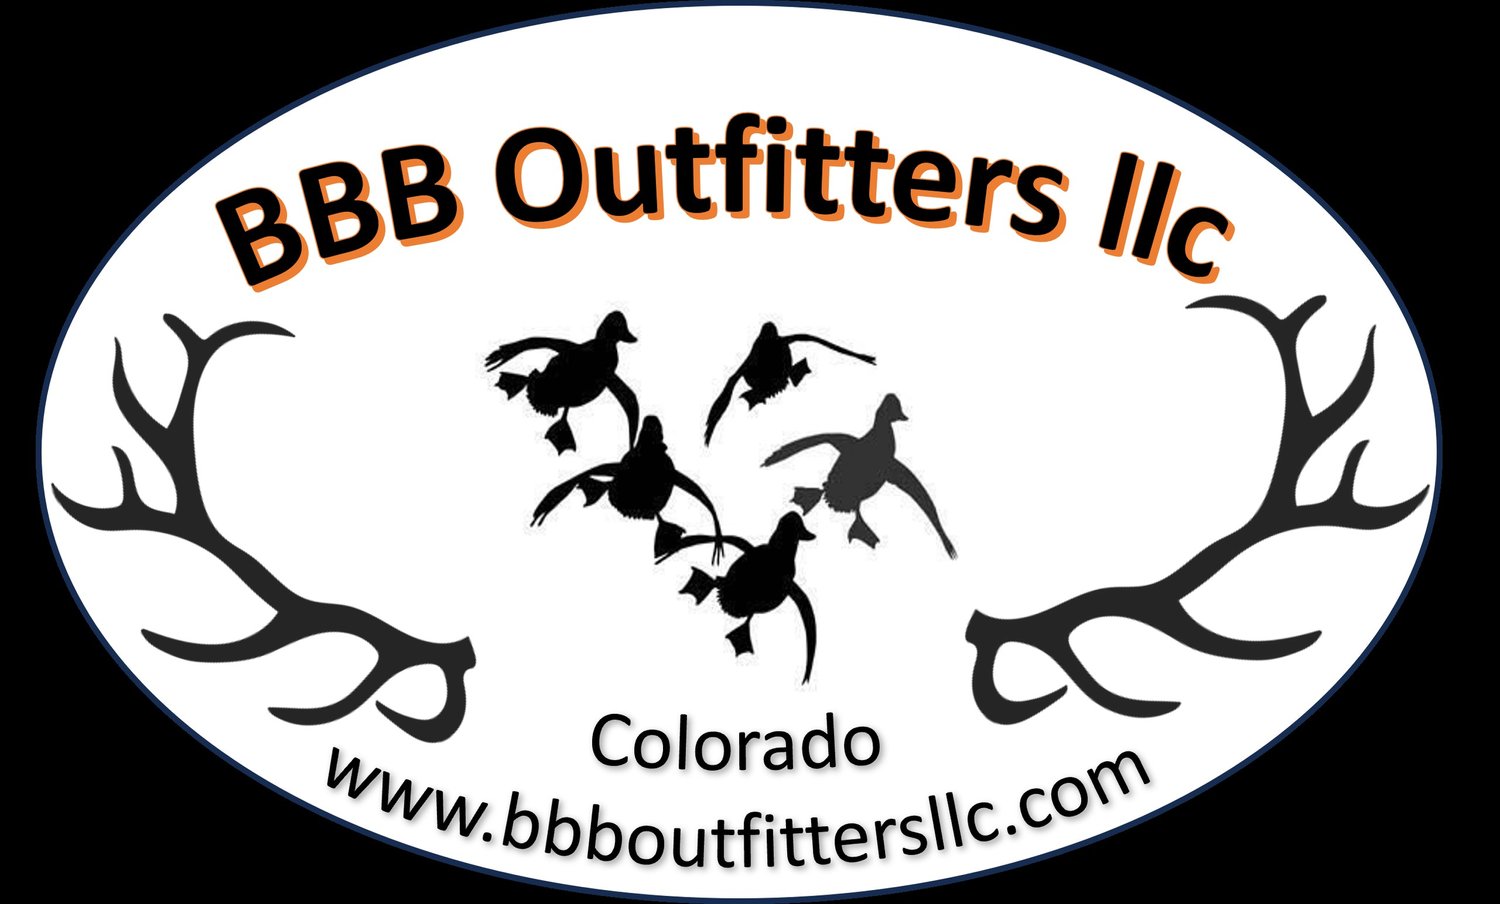 BBB Outfitters LLC